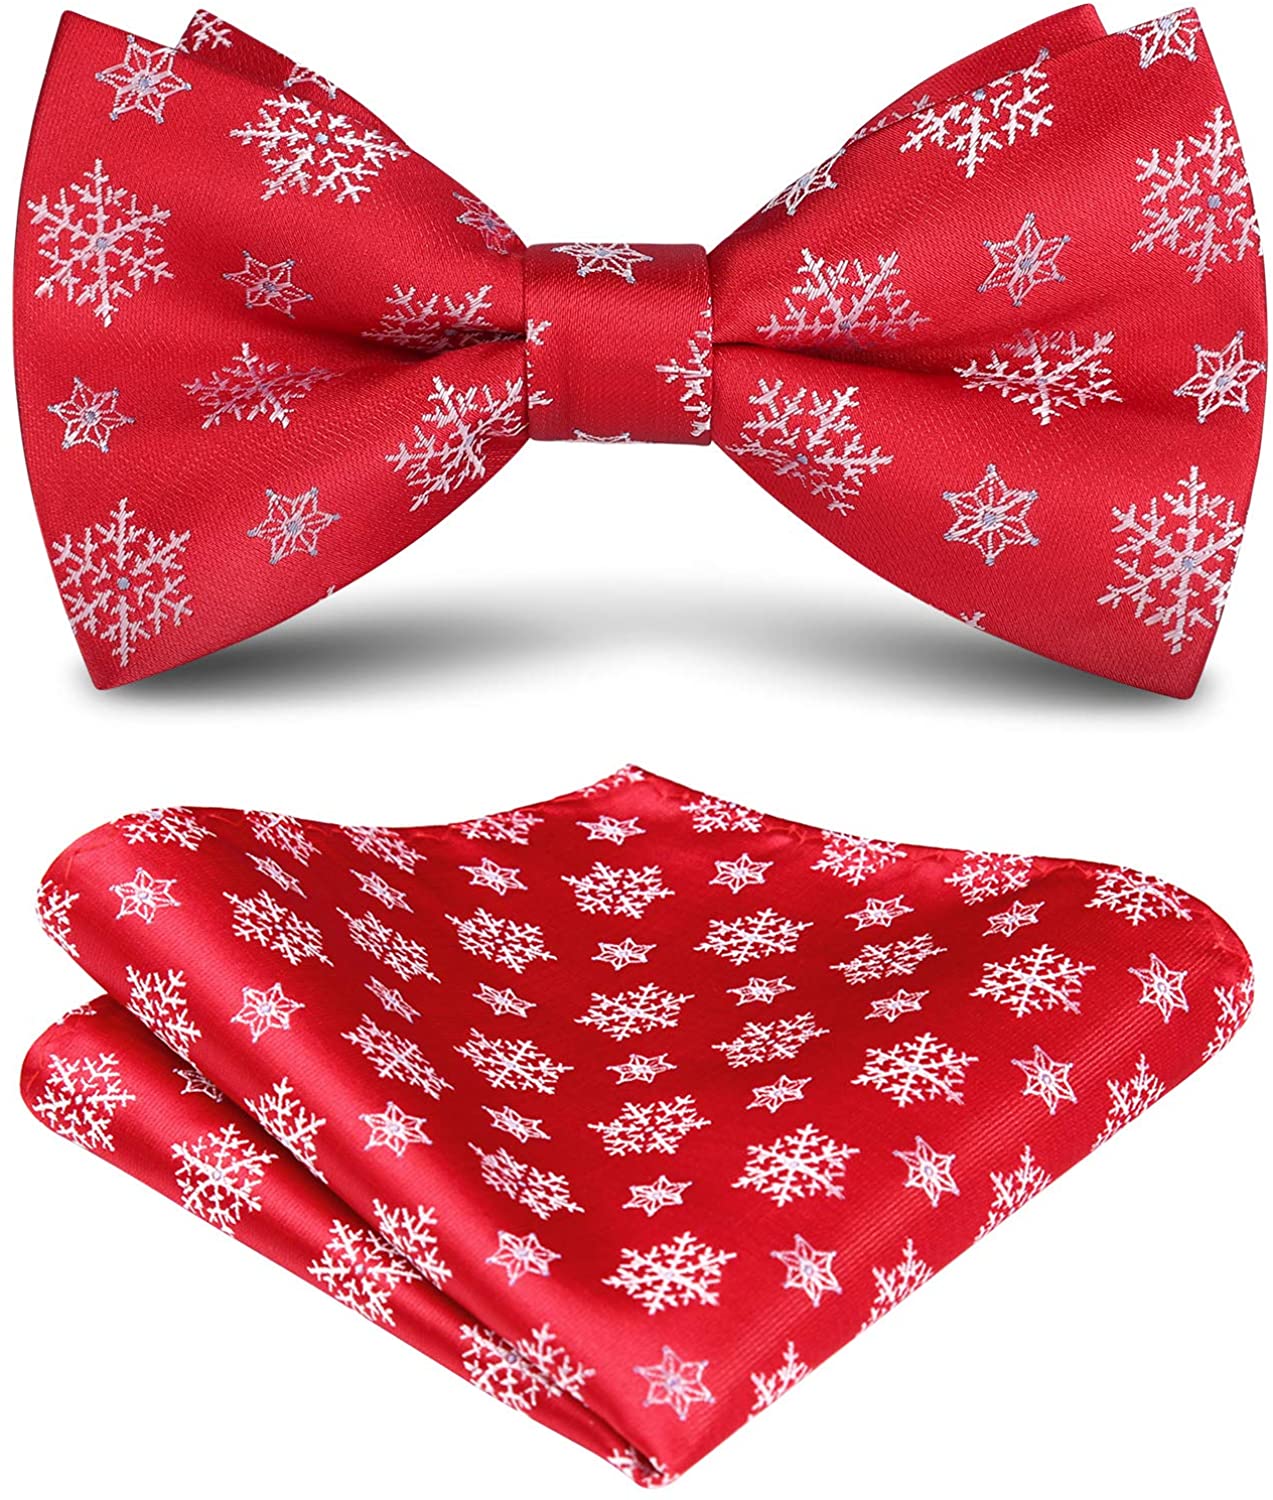 HISDERN Christmas Bow Tie and Pocket Square Set for Men Pre Tied Bowties Xmas Festive Woven Bowtie with Handkerchief 